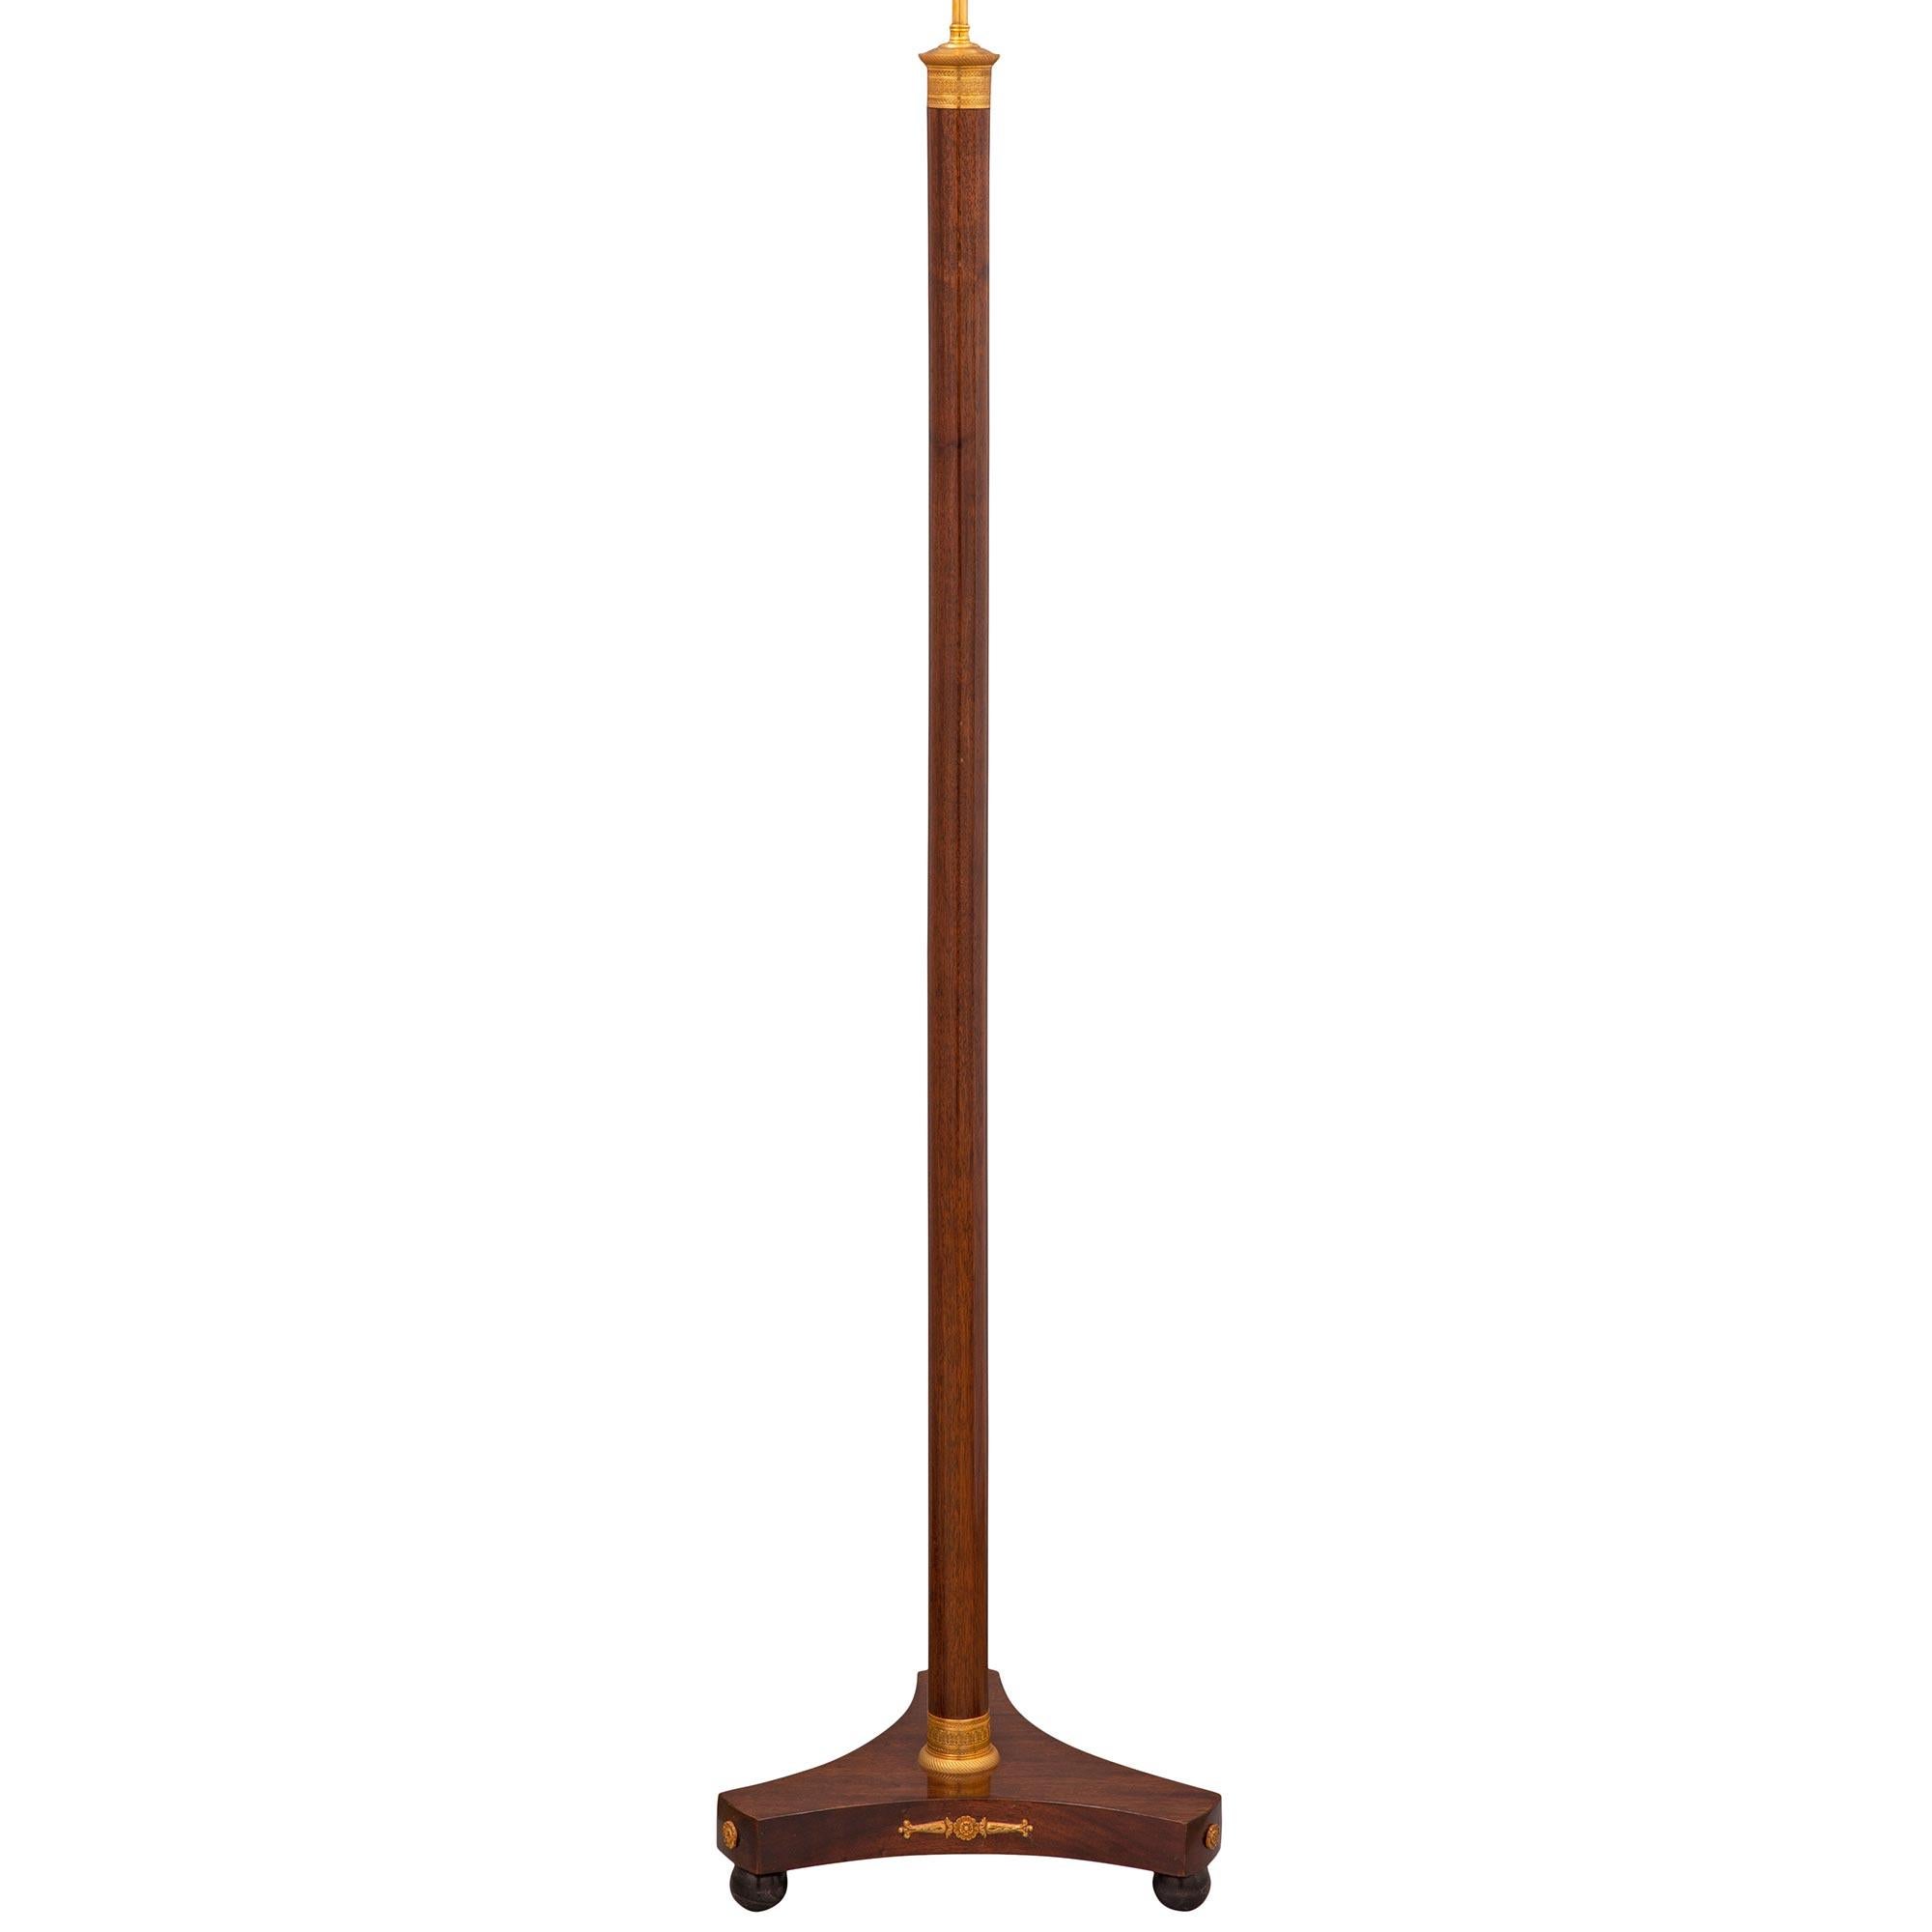 Neoclassical French 19th Century Neo-Classical St. Mahogany, Ebony and Ormolu Floor Lamp For Sale